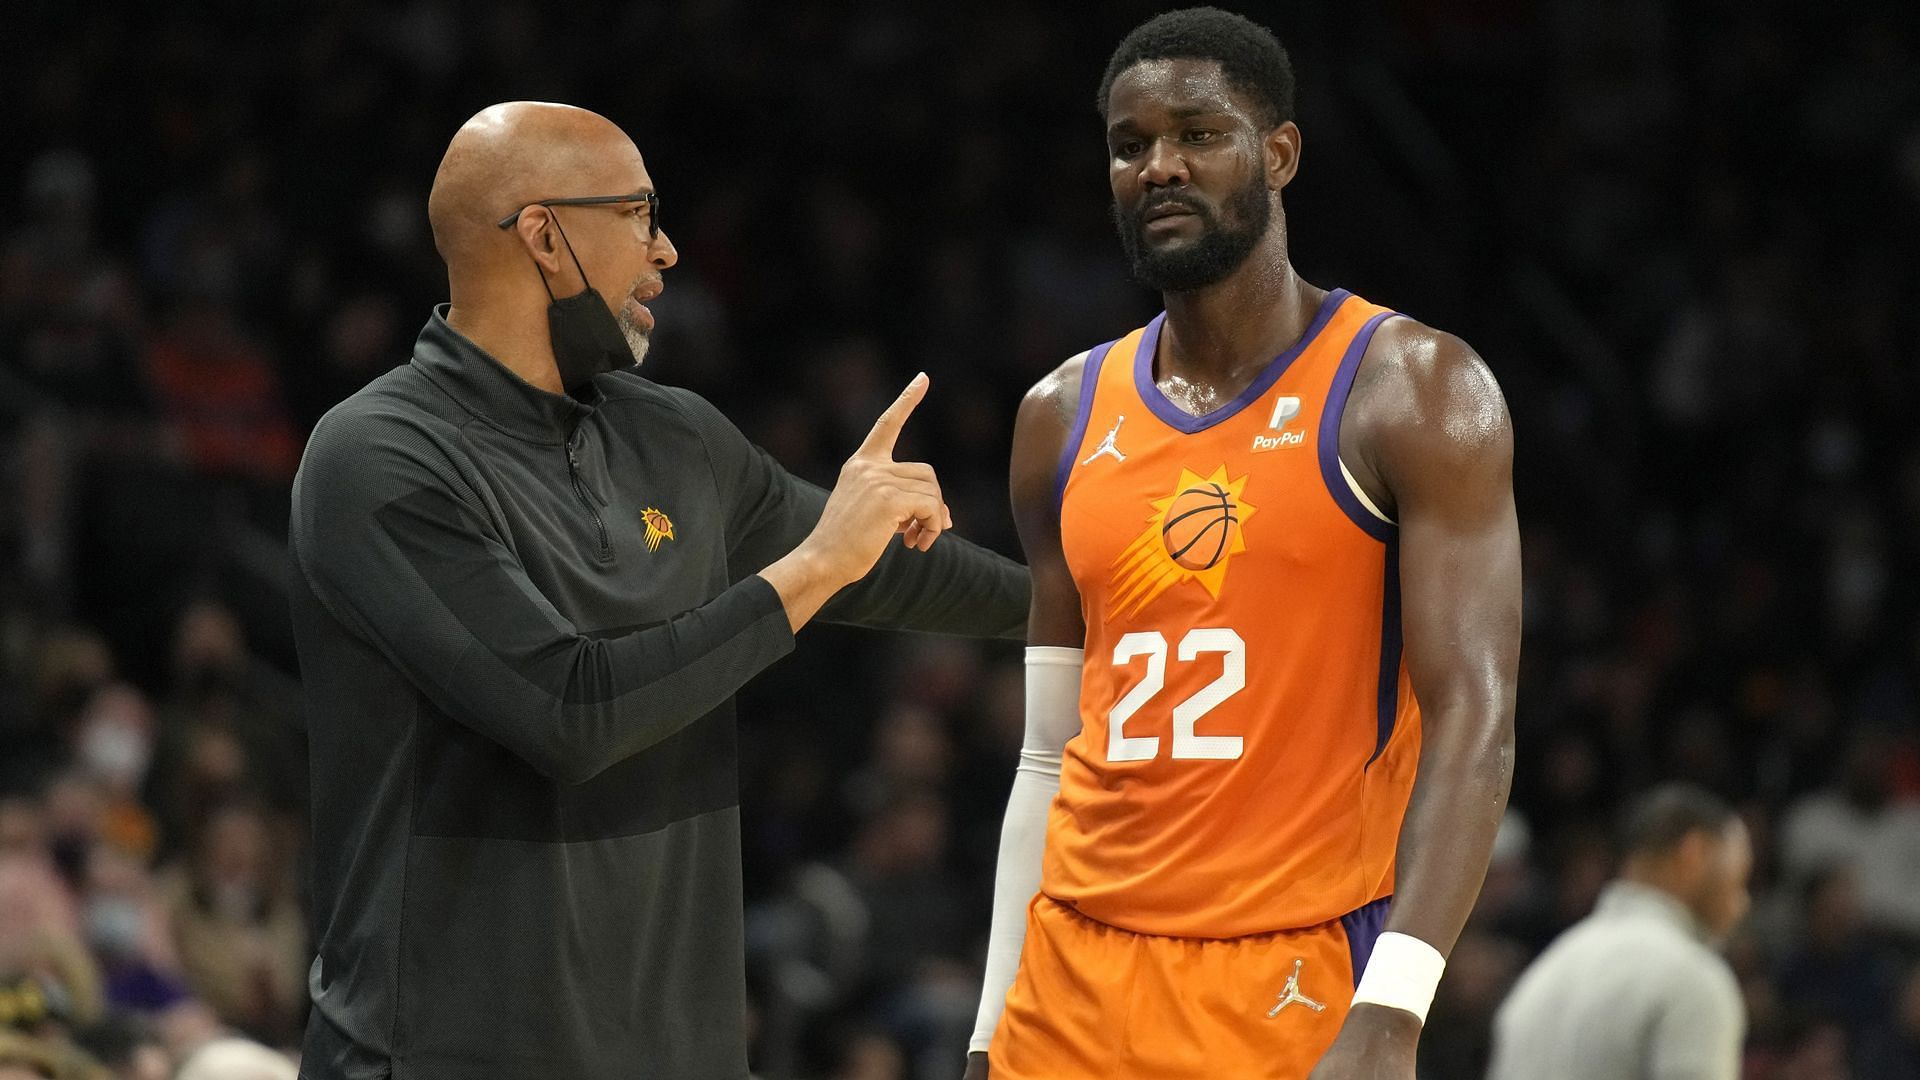 Phoenix Suns head coach benched starting center Deandre Ayton for nearly the entire second-half of the blowout loss to the Dallas Mavericks. [Photo: NBC Sports]